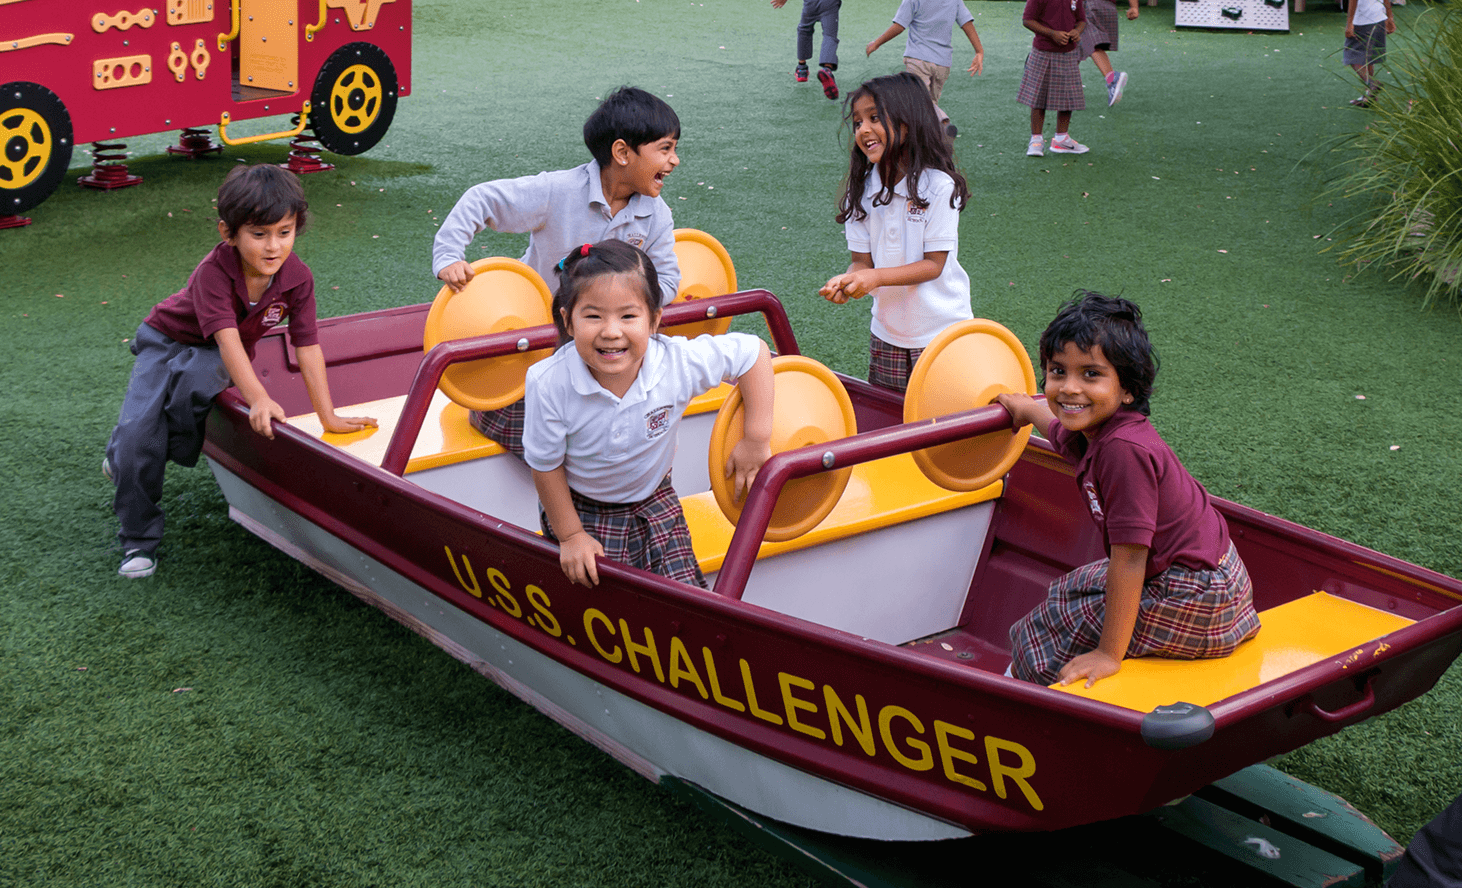 Playground Boat | Challenger School - Avery Ranch | Private School In Austin, Texas